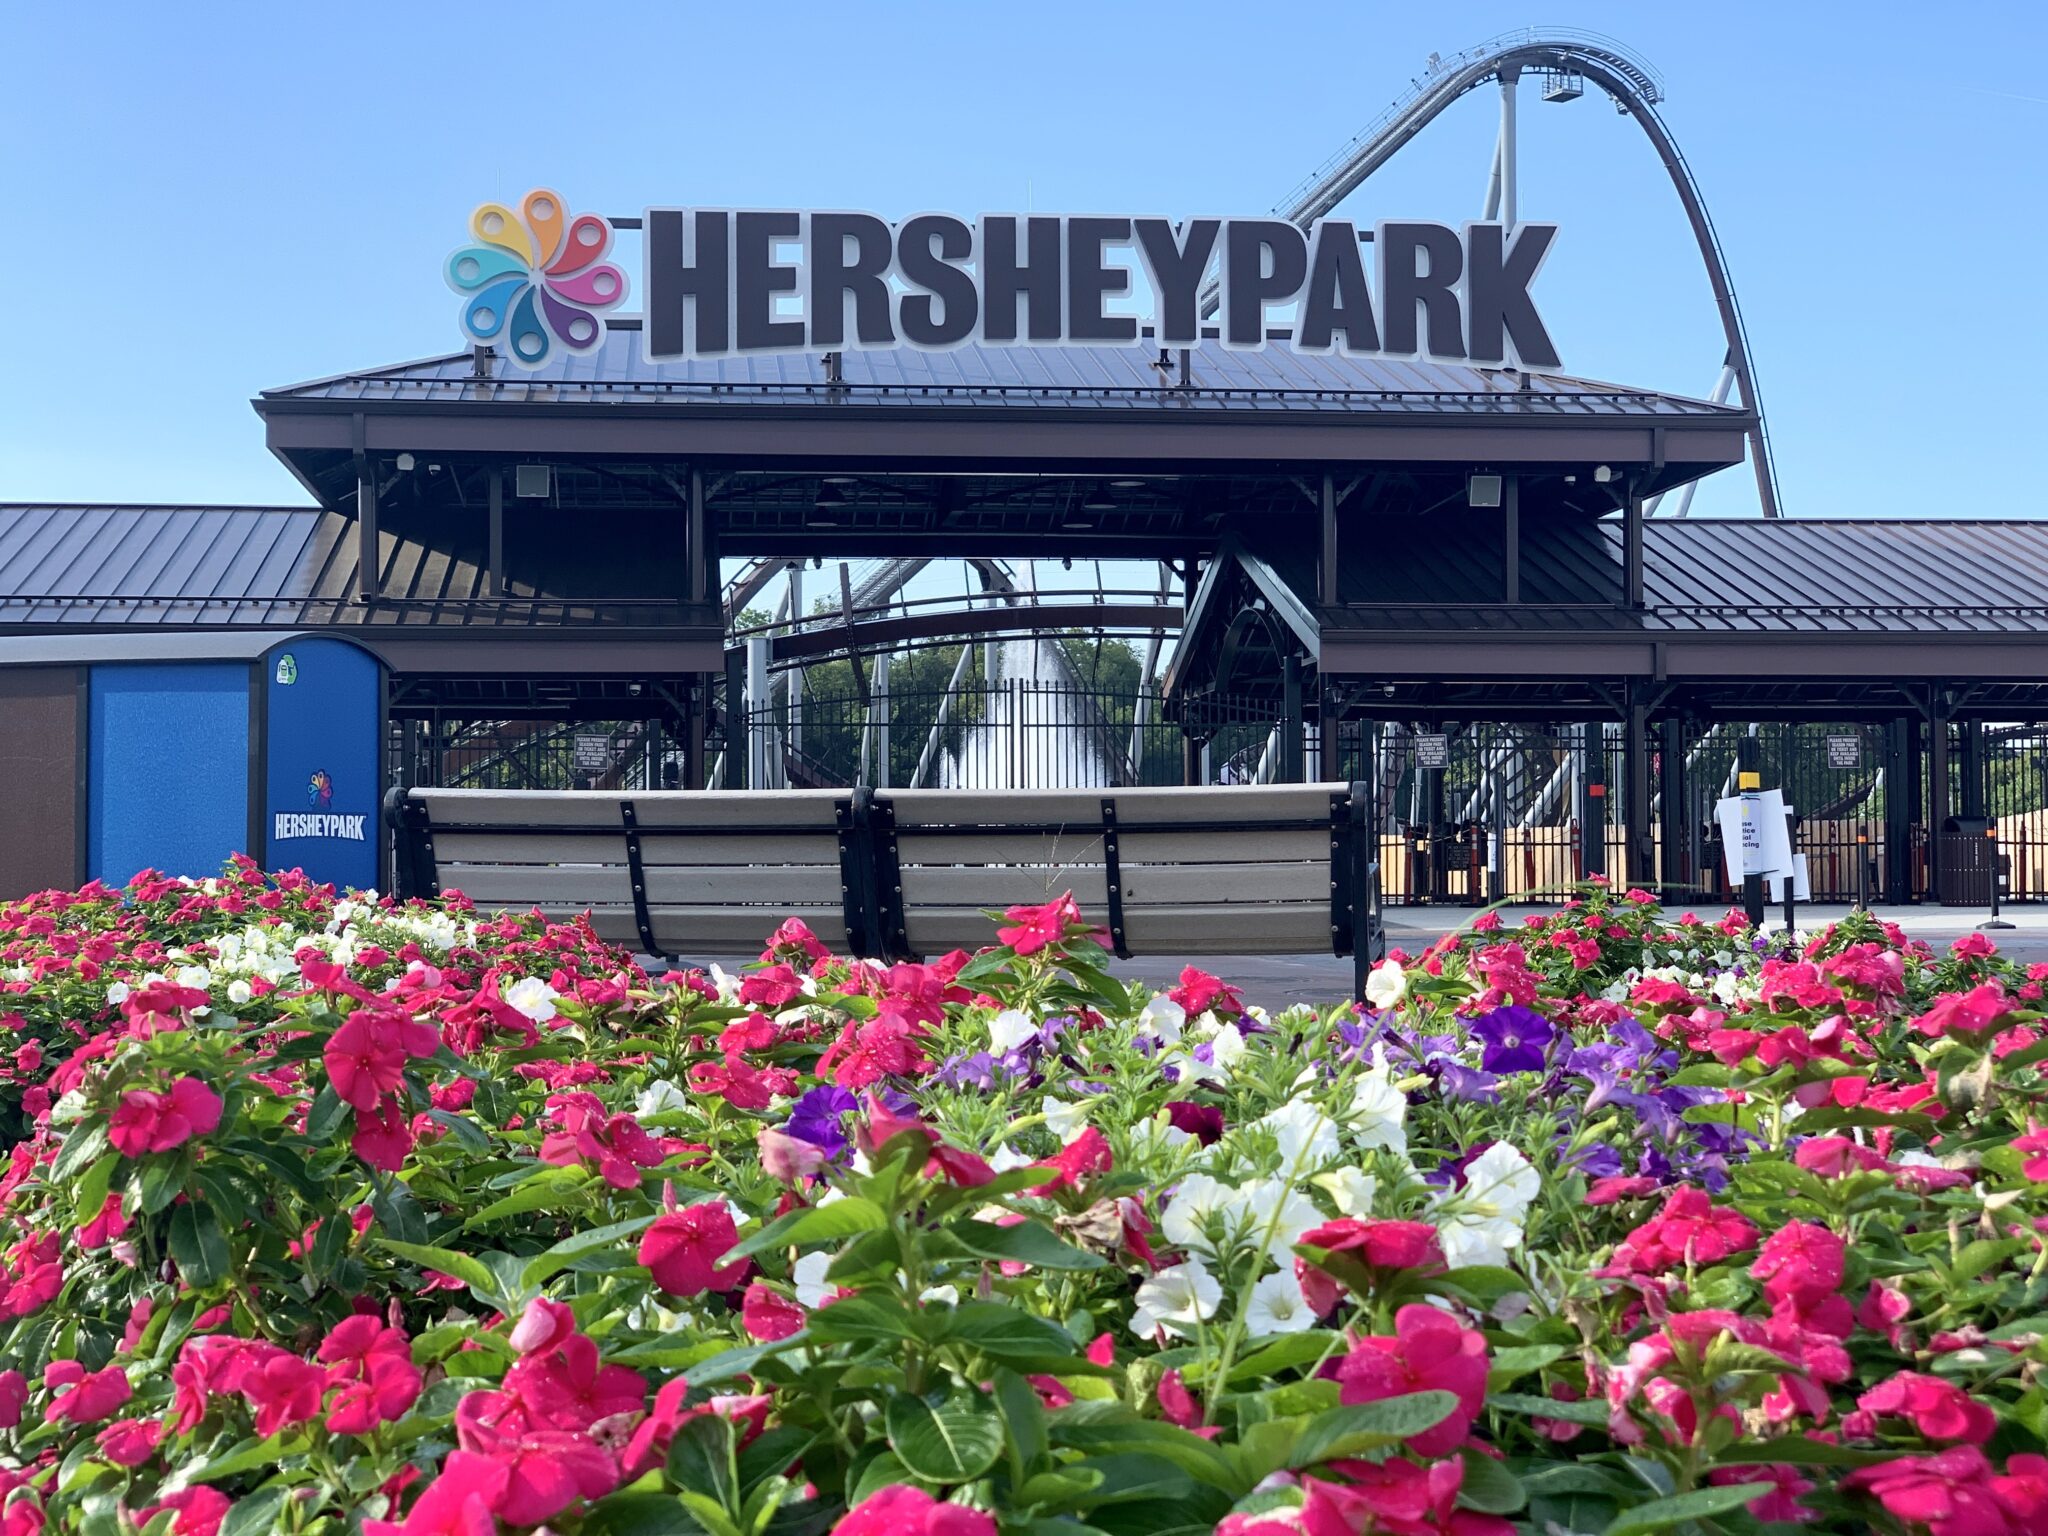 Hersheypark Springtime In The Park Opens April 2 With More Weekends